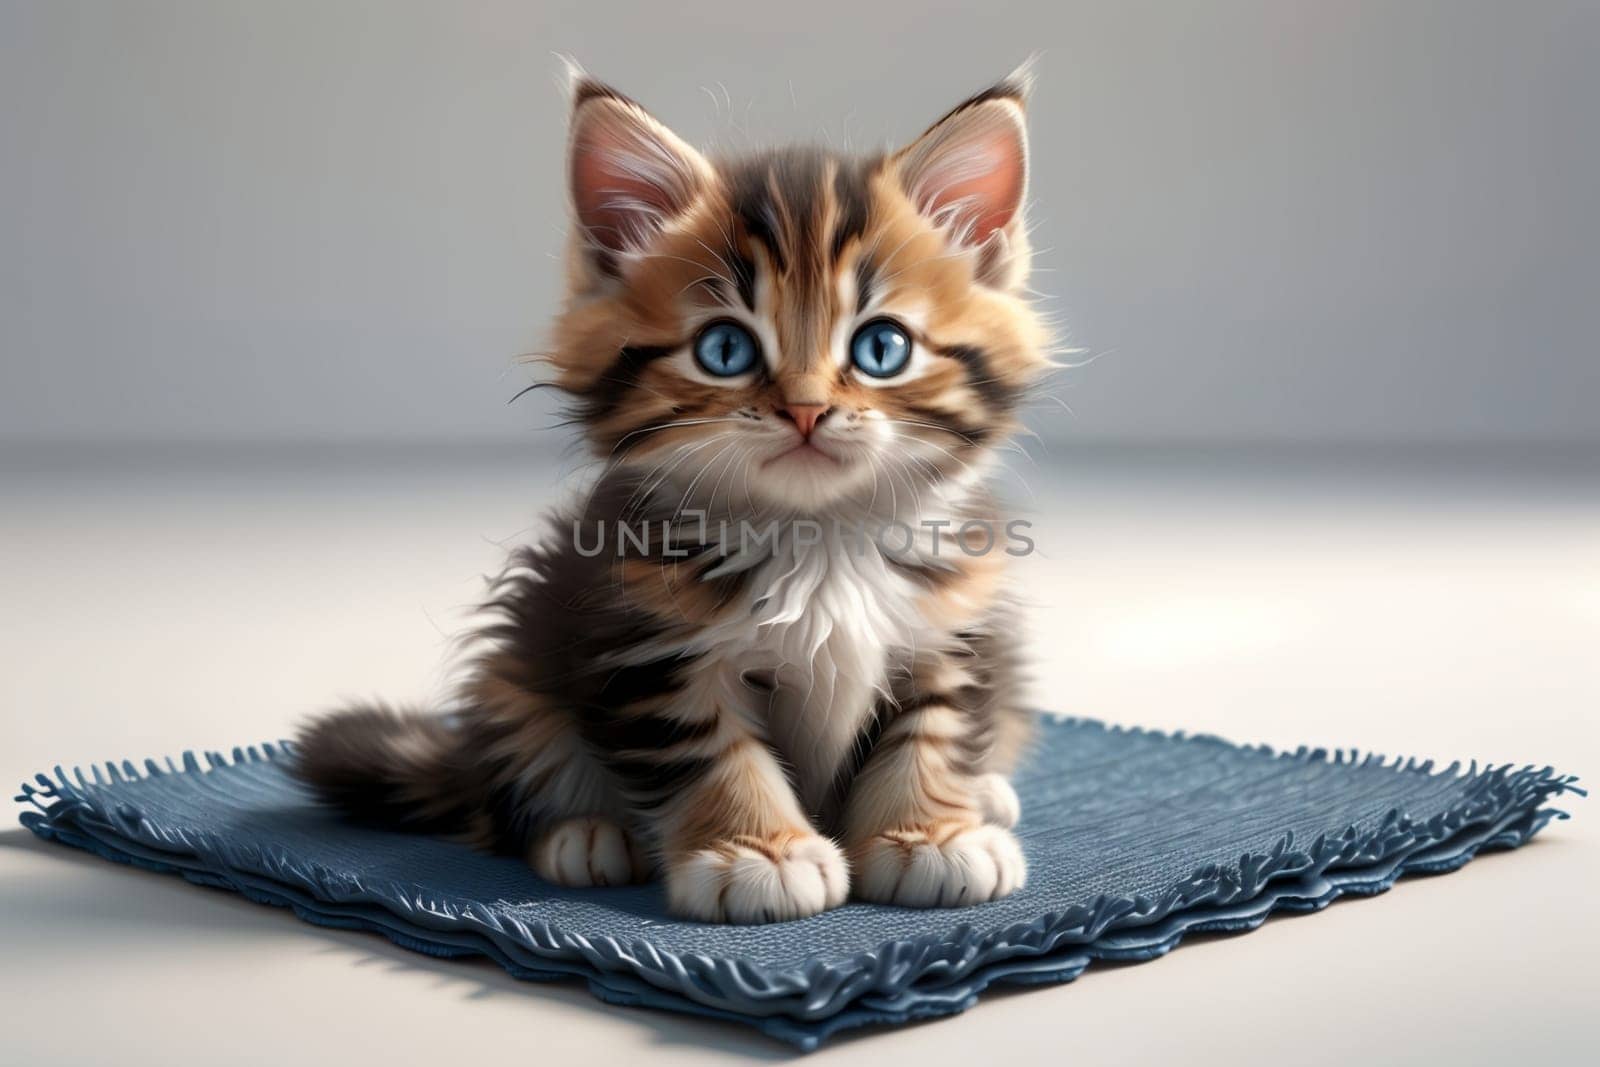 portrait of a cute white kitten with long hair, obedient and cute, sitting on a rug in an empty room .